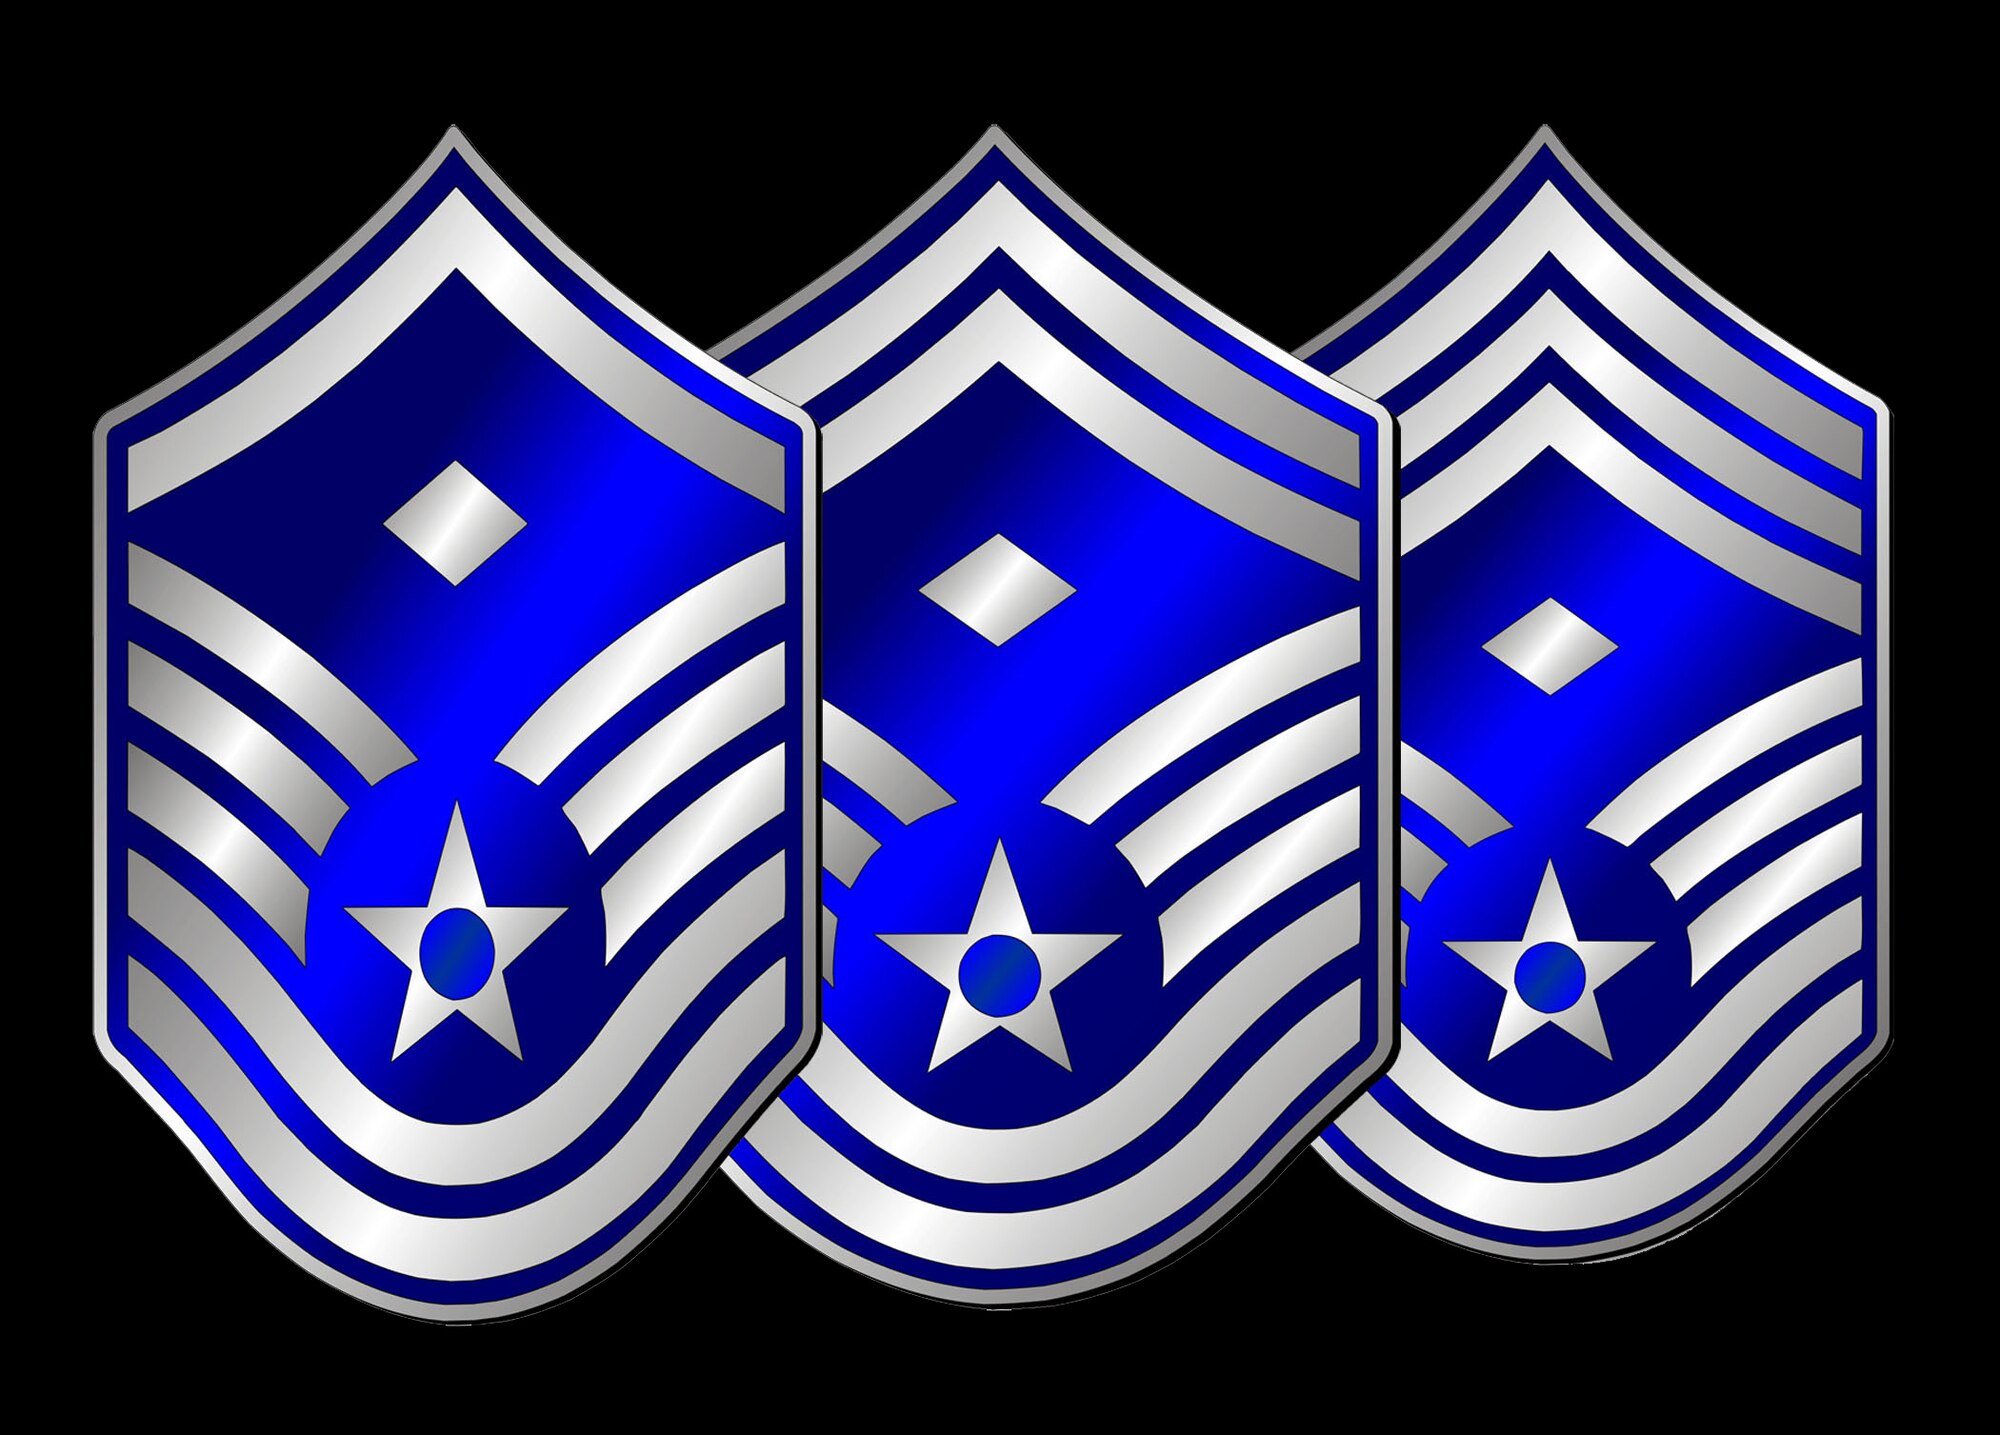 First Sergeant chevrons. First sergeants, or “first shirt or shirt” as they are referred to, play a vital role in the health, readiness and development of any unit. AFI 36-2113 states shirts are responsible for the squadron’s health, welfare, and morale.